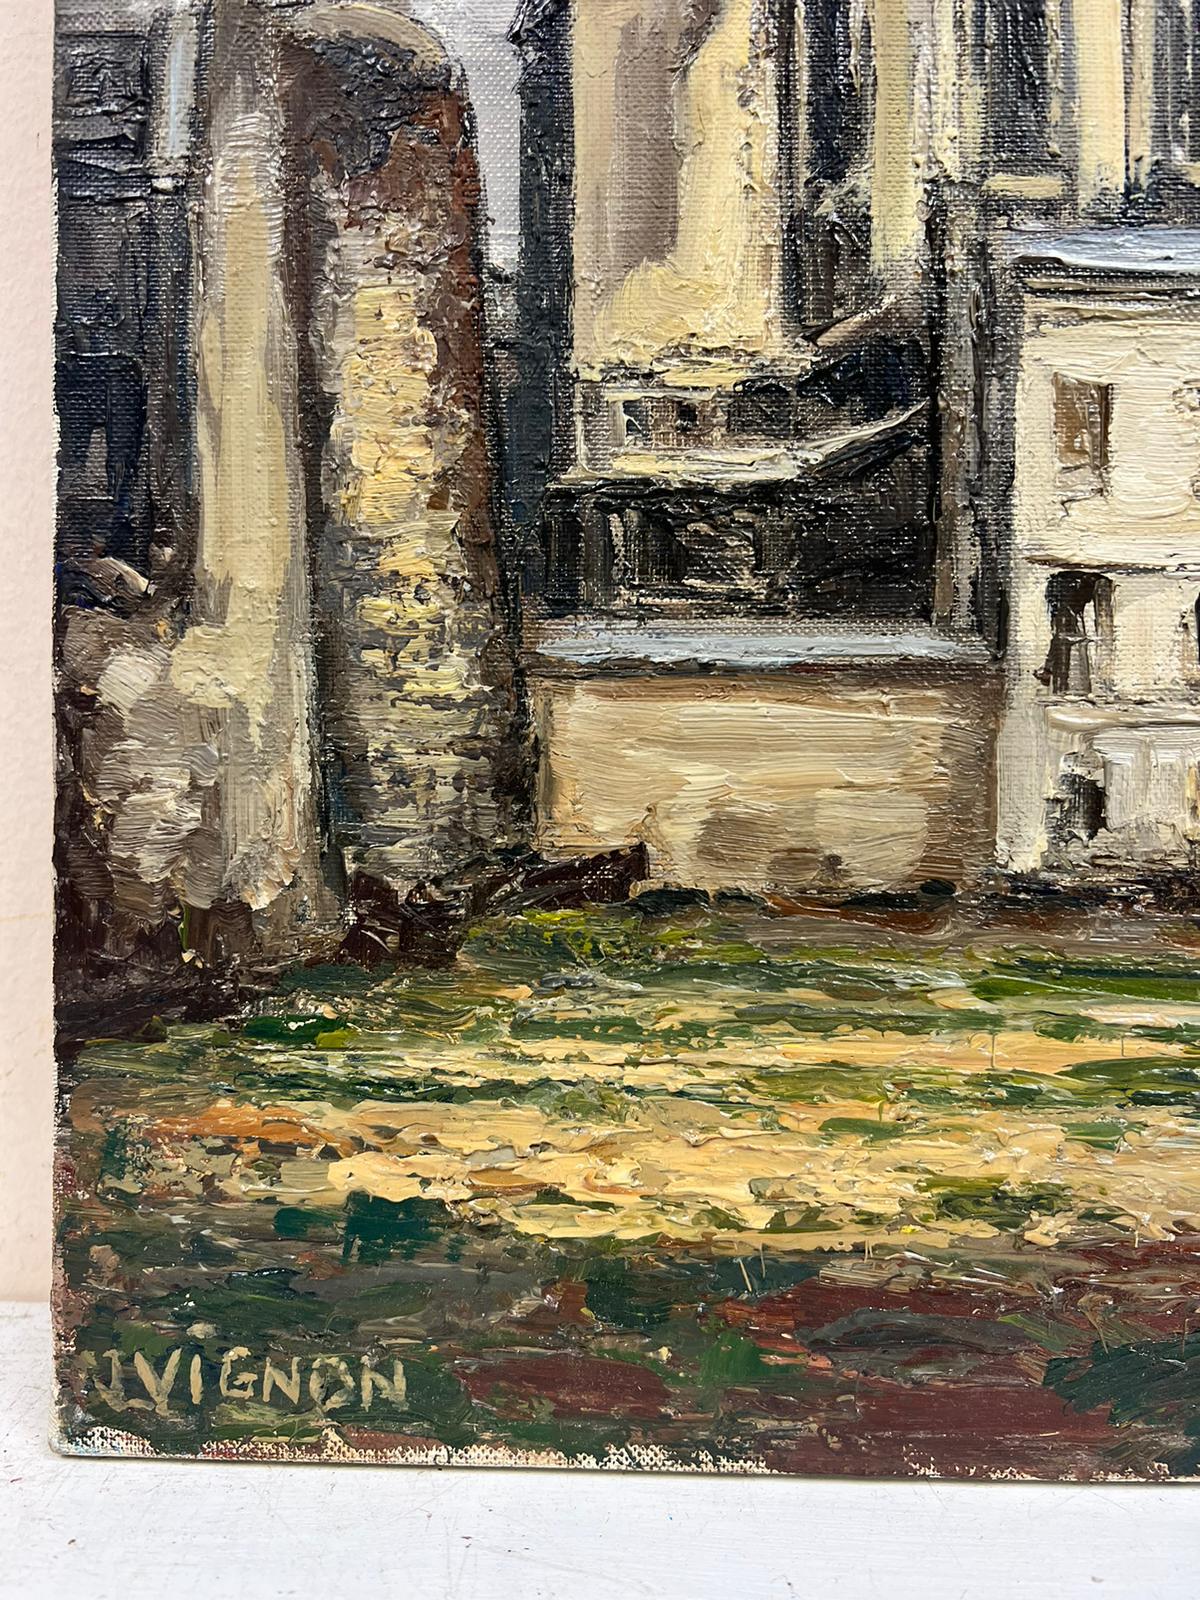 St Pauls Church
by Josine Vignon (French 1922-2022)
signed on front and back
oil painting on canvas, unframed

canvas: 18 x 15 inches

Colors: Grey colors, beige, yellow, green, brown and white

Very good condition

Provenance: from the artists